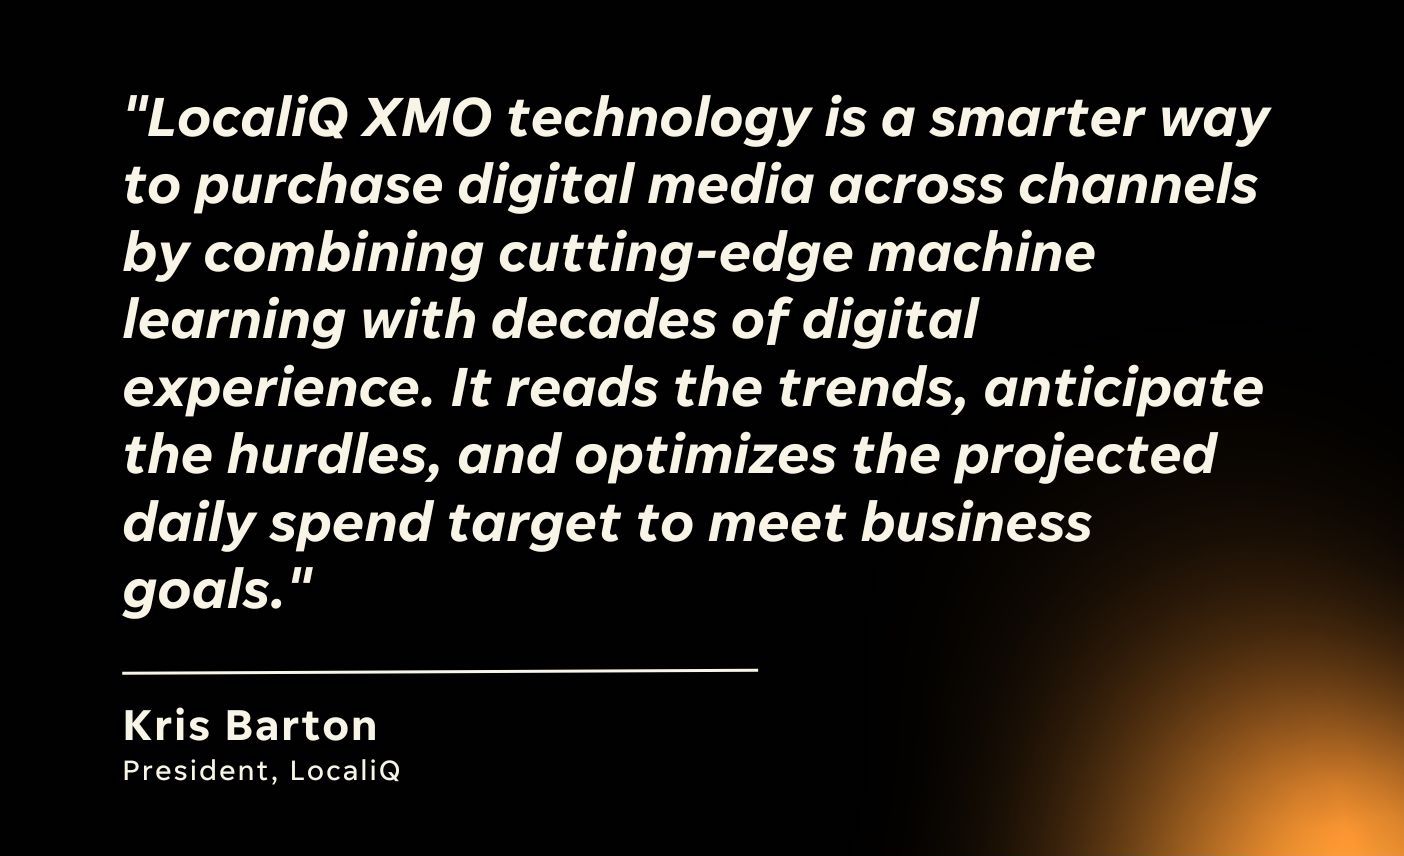 quote from kris barton about localiq xmo technology